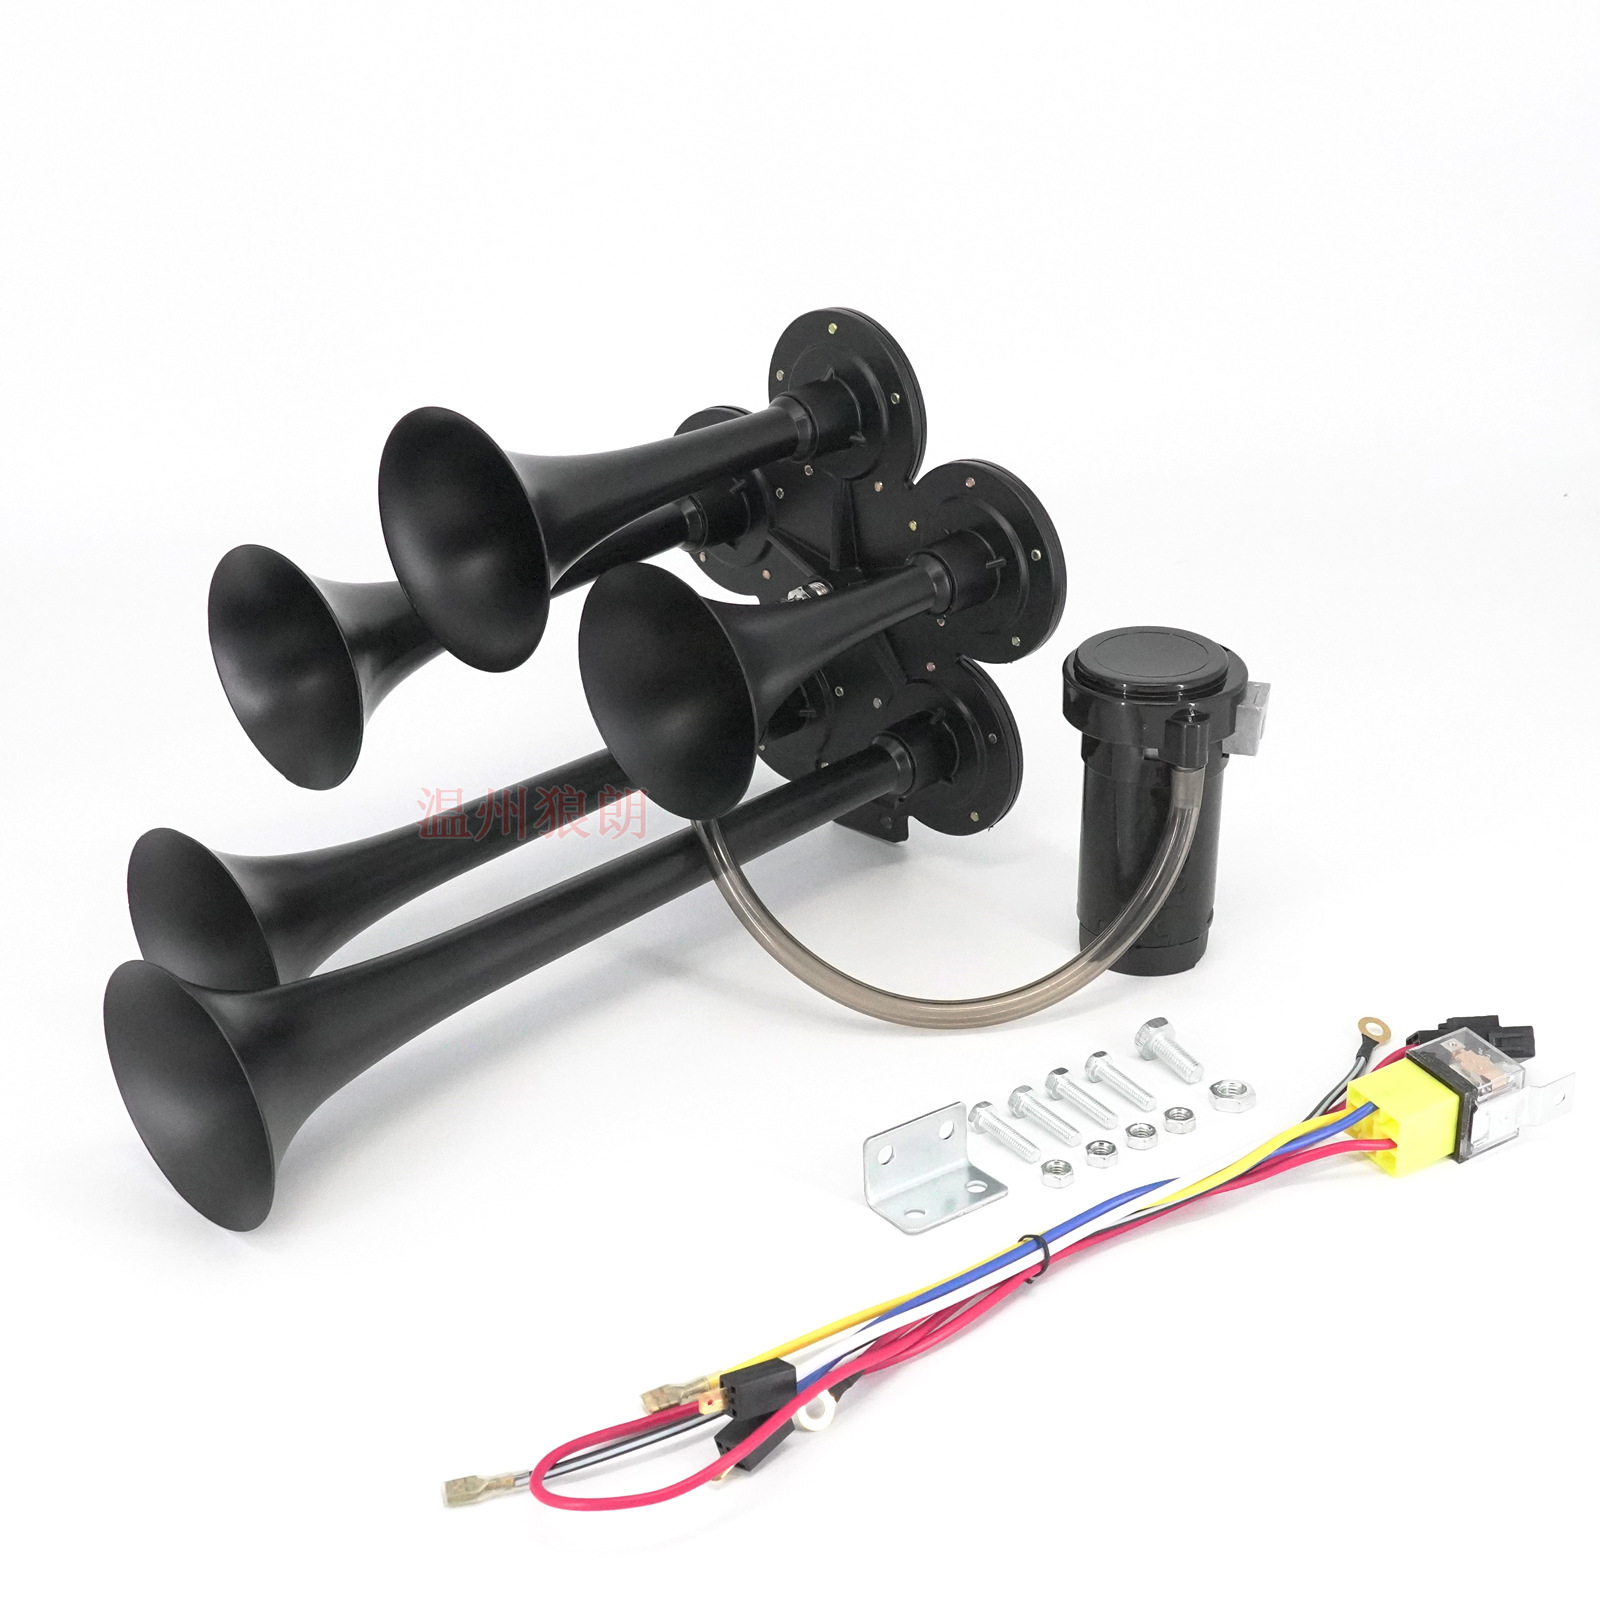 12V high-pitched black metal five-tube air horn air motor air pump with relay wiring harness super whistle sound